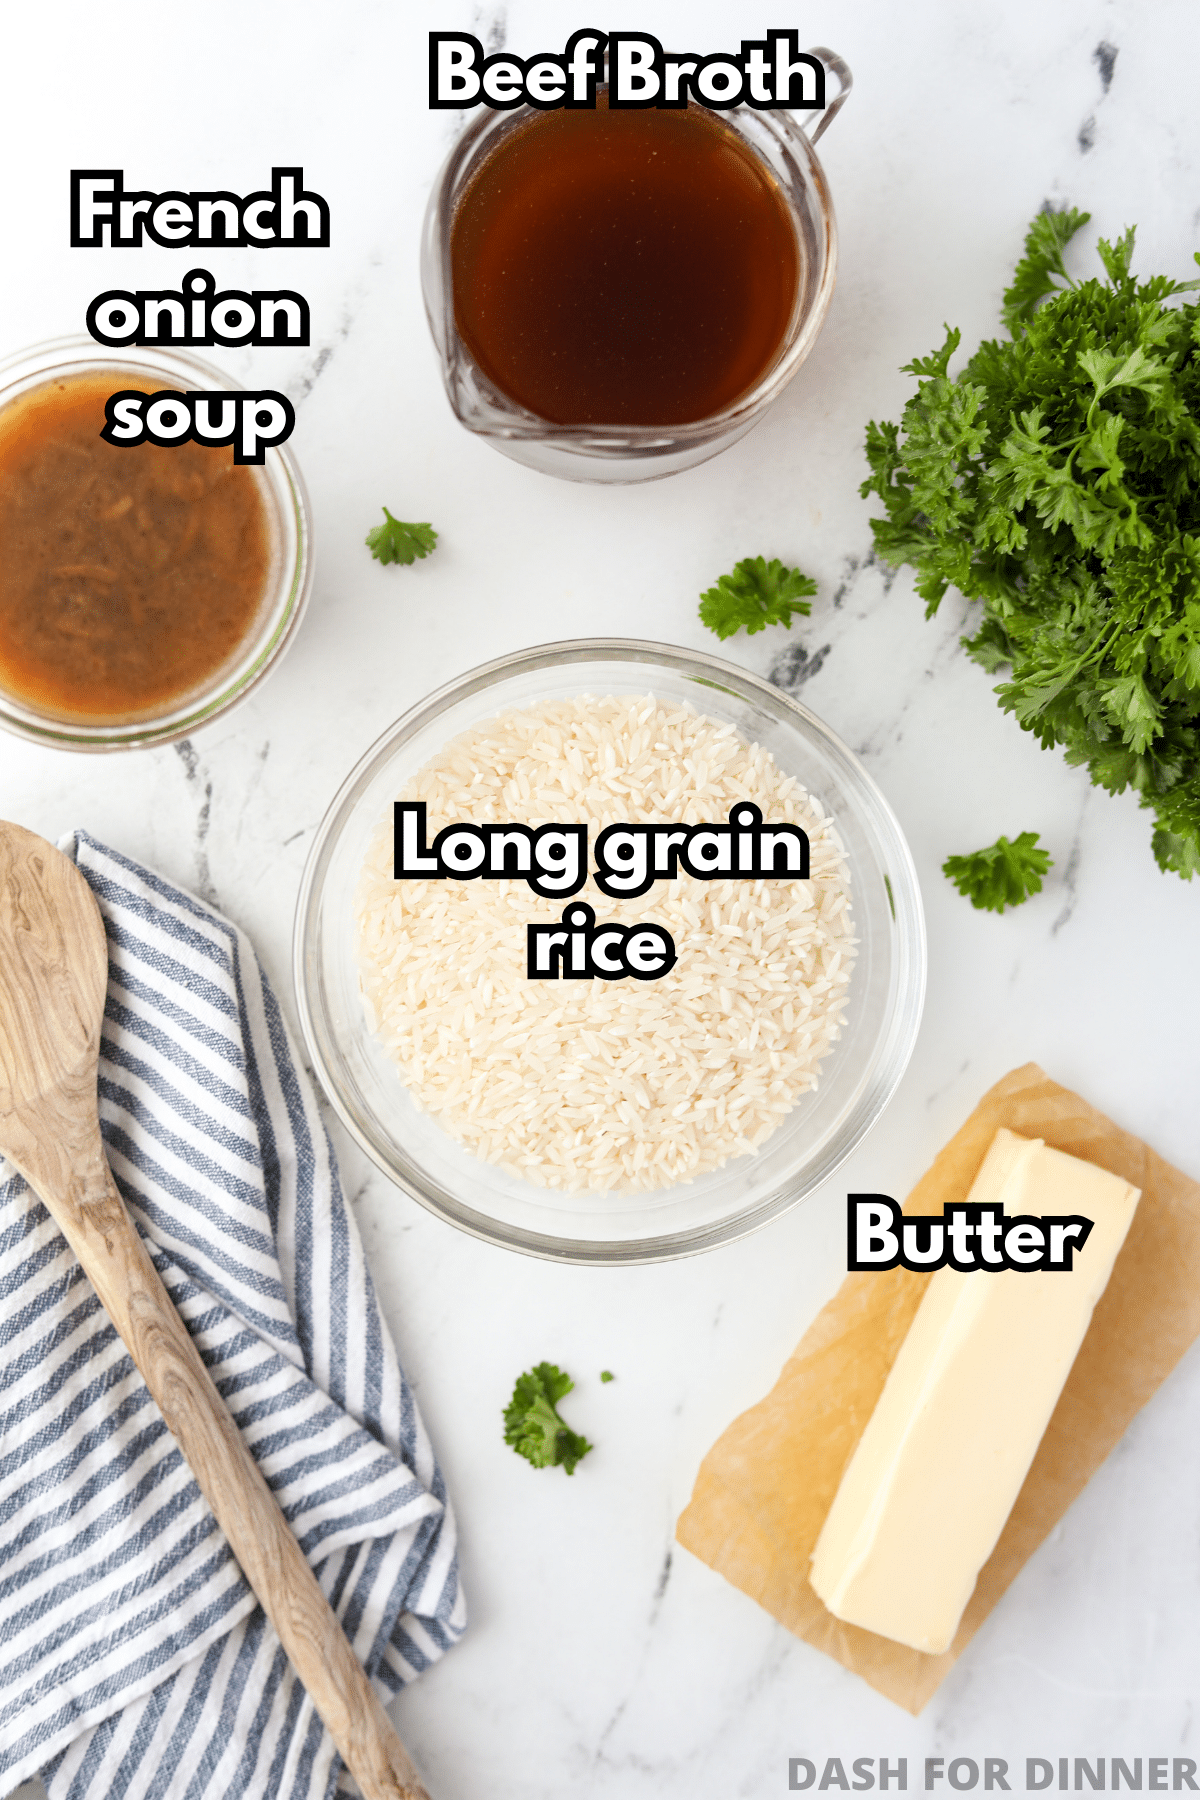 The ingredients needed to make butter rice: broth, French onion soul, butter, and long-grain rice.